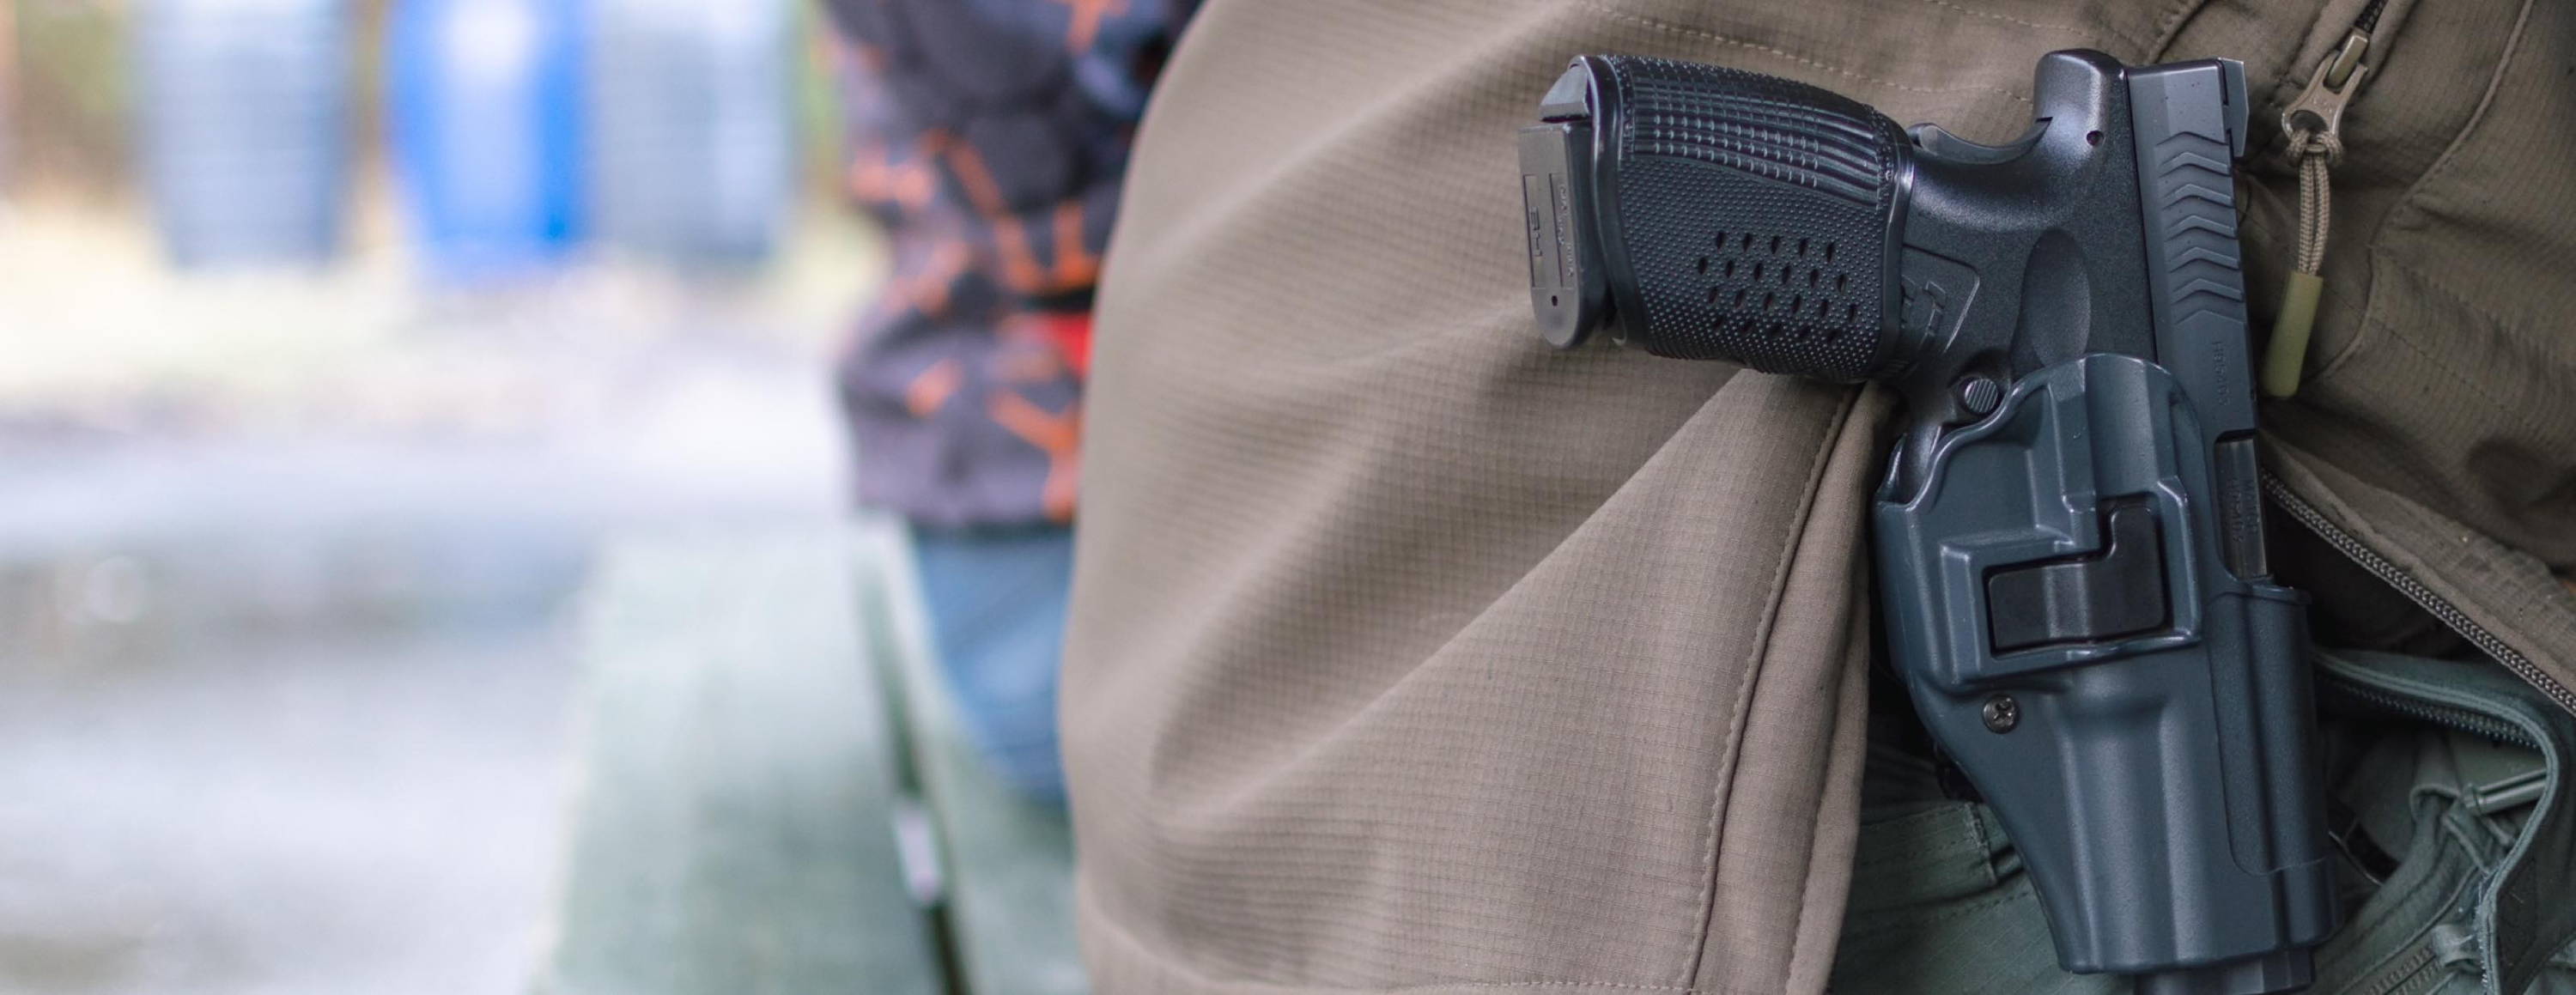 Man sitting on park bench with gun in open carry holster